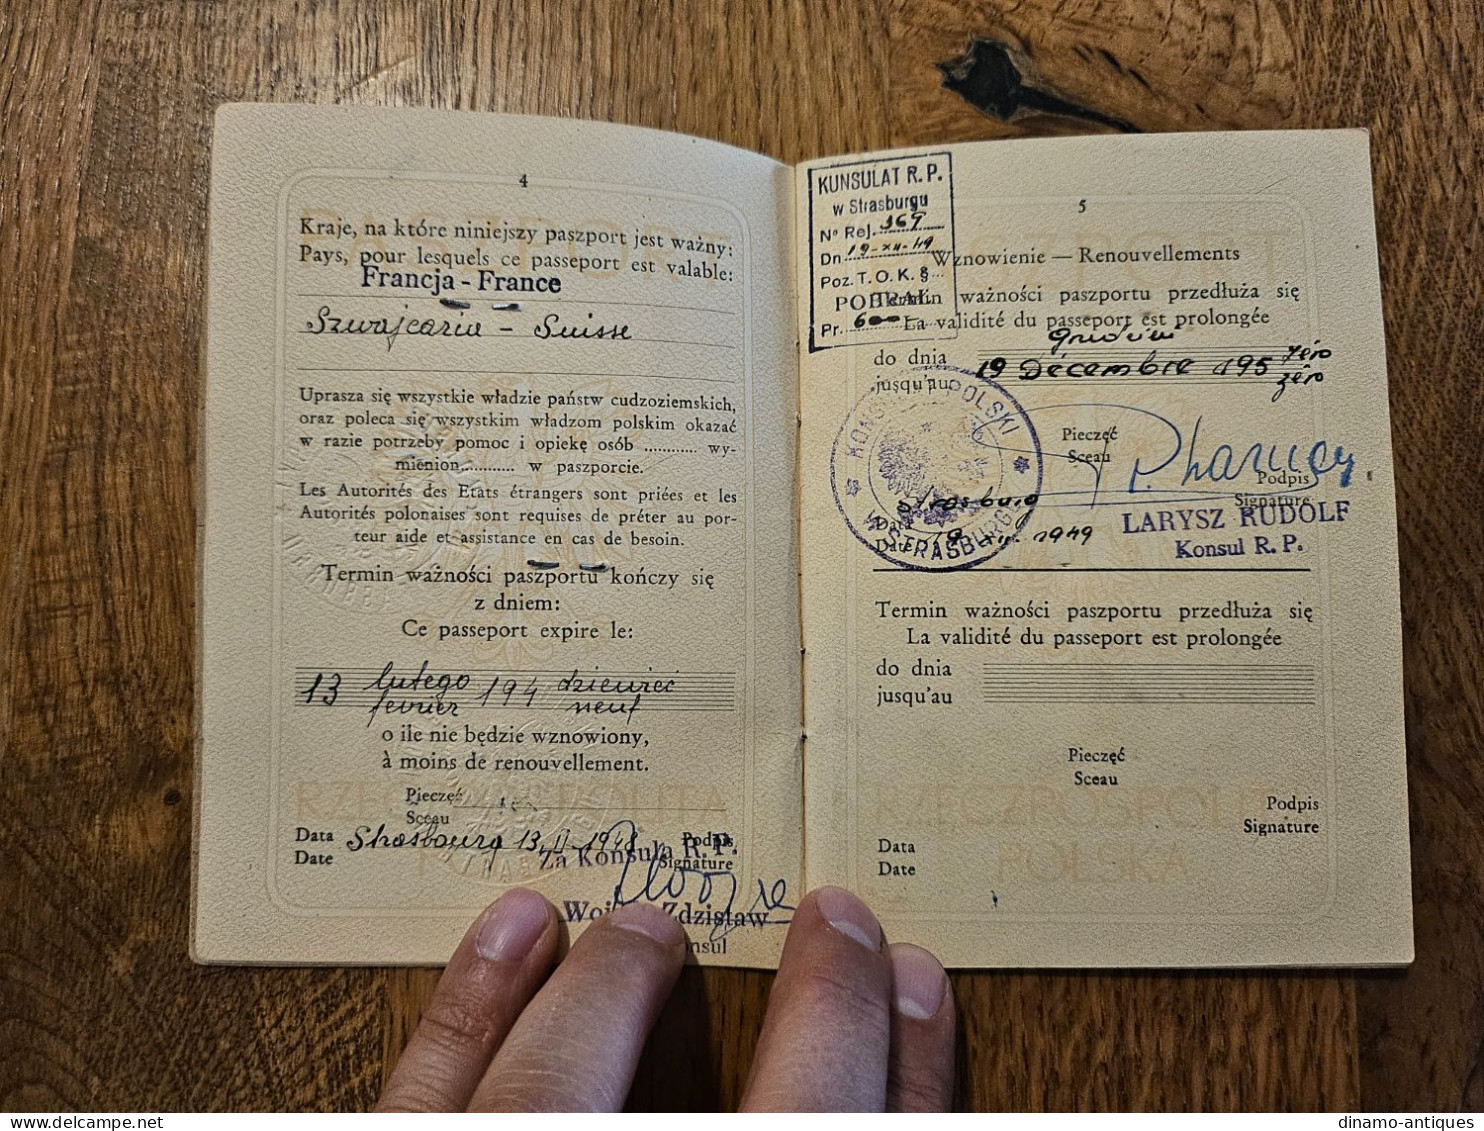 1948 Poland Passport Passeport Issued In Strasbourg For Travel To Switzerland & France - Historical Documents